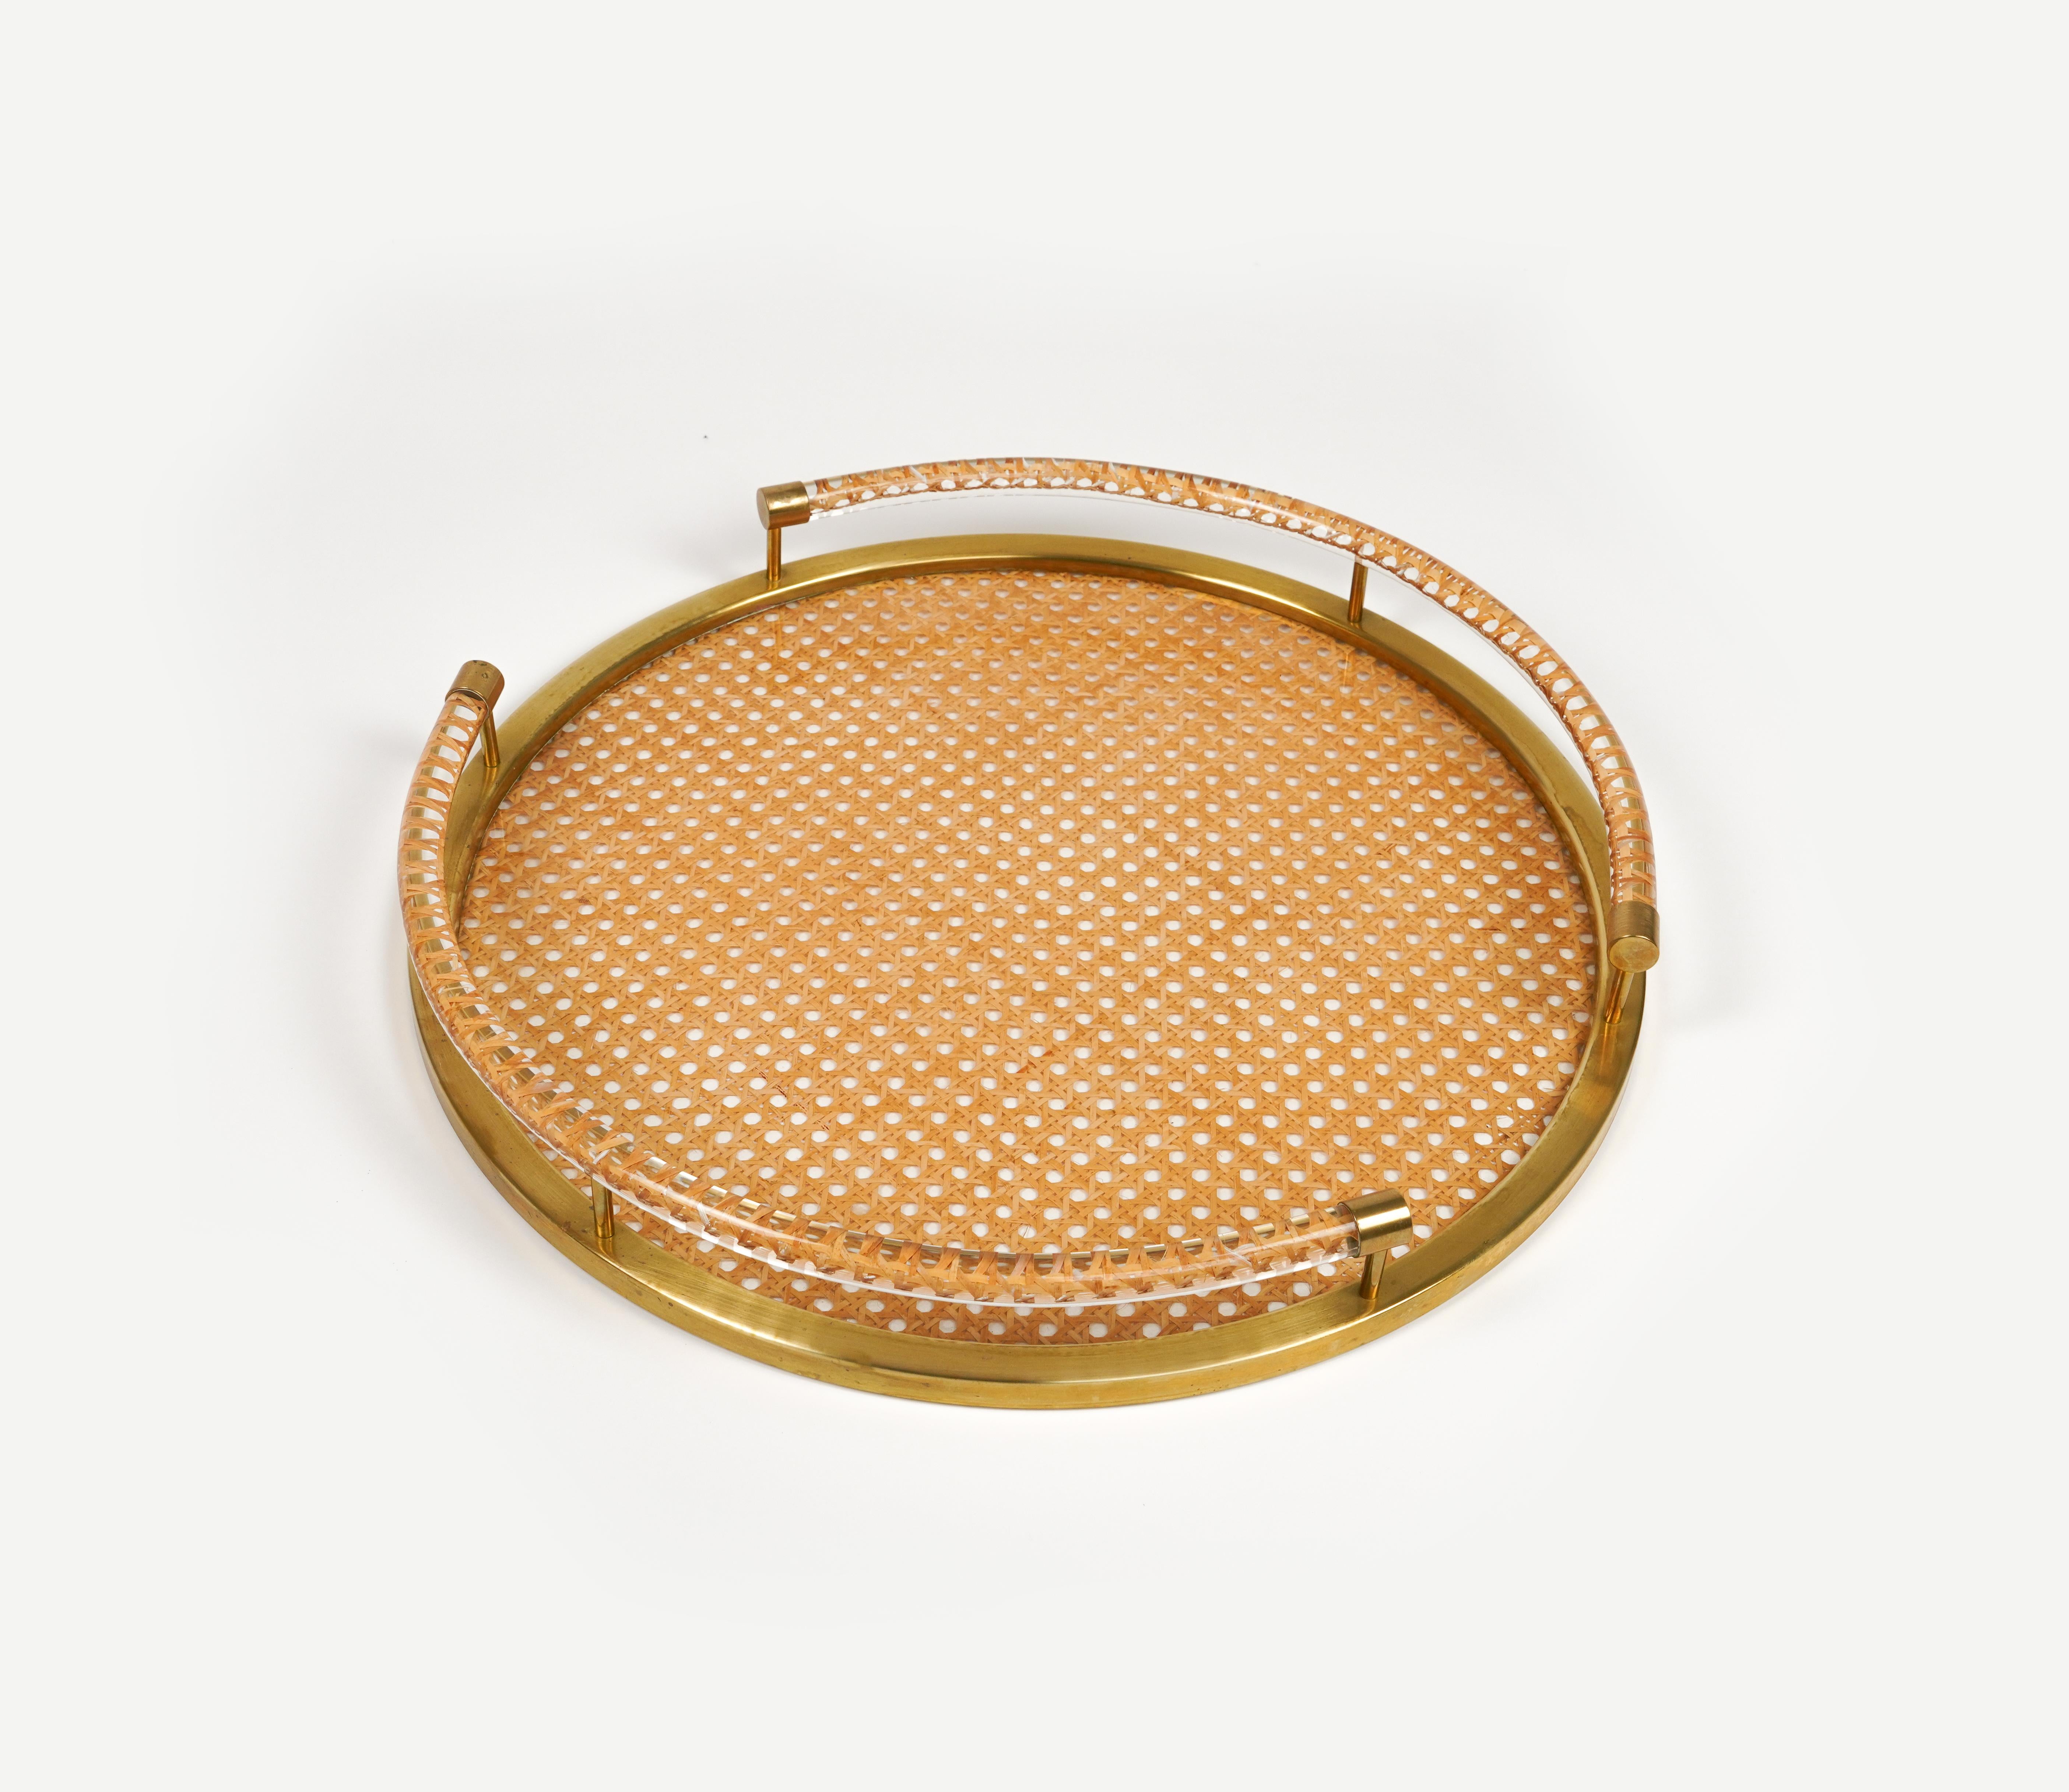 Italian Round Serving Tray in Lucite, Rattan and Brass Christian Dior Style, Italy 1970s For Sale